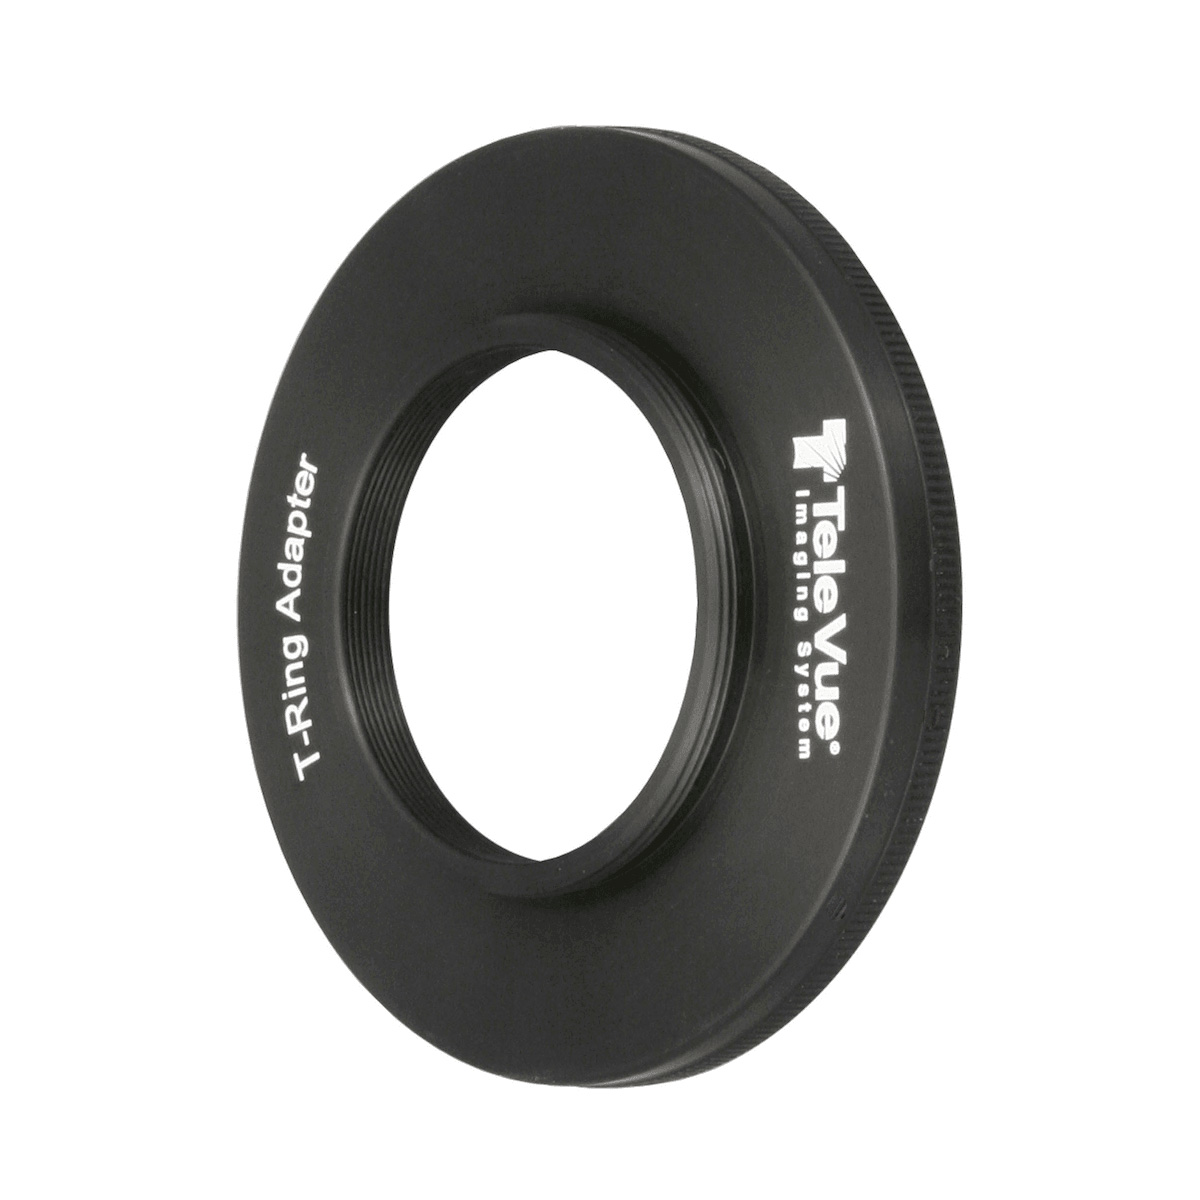 Tele Vue Standard T-Ring Adapter for 2.4''